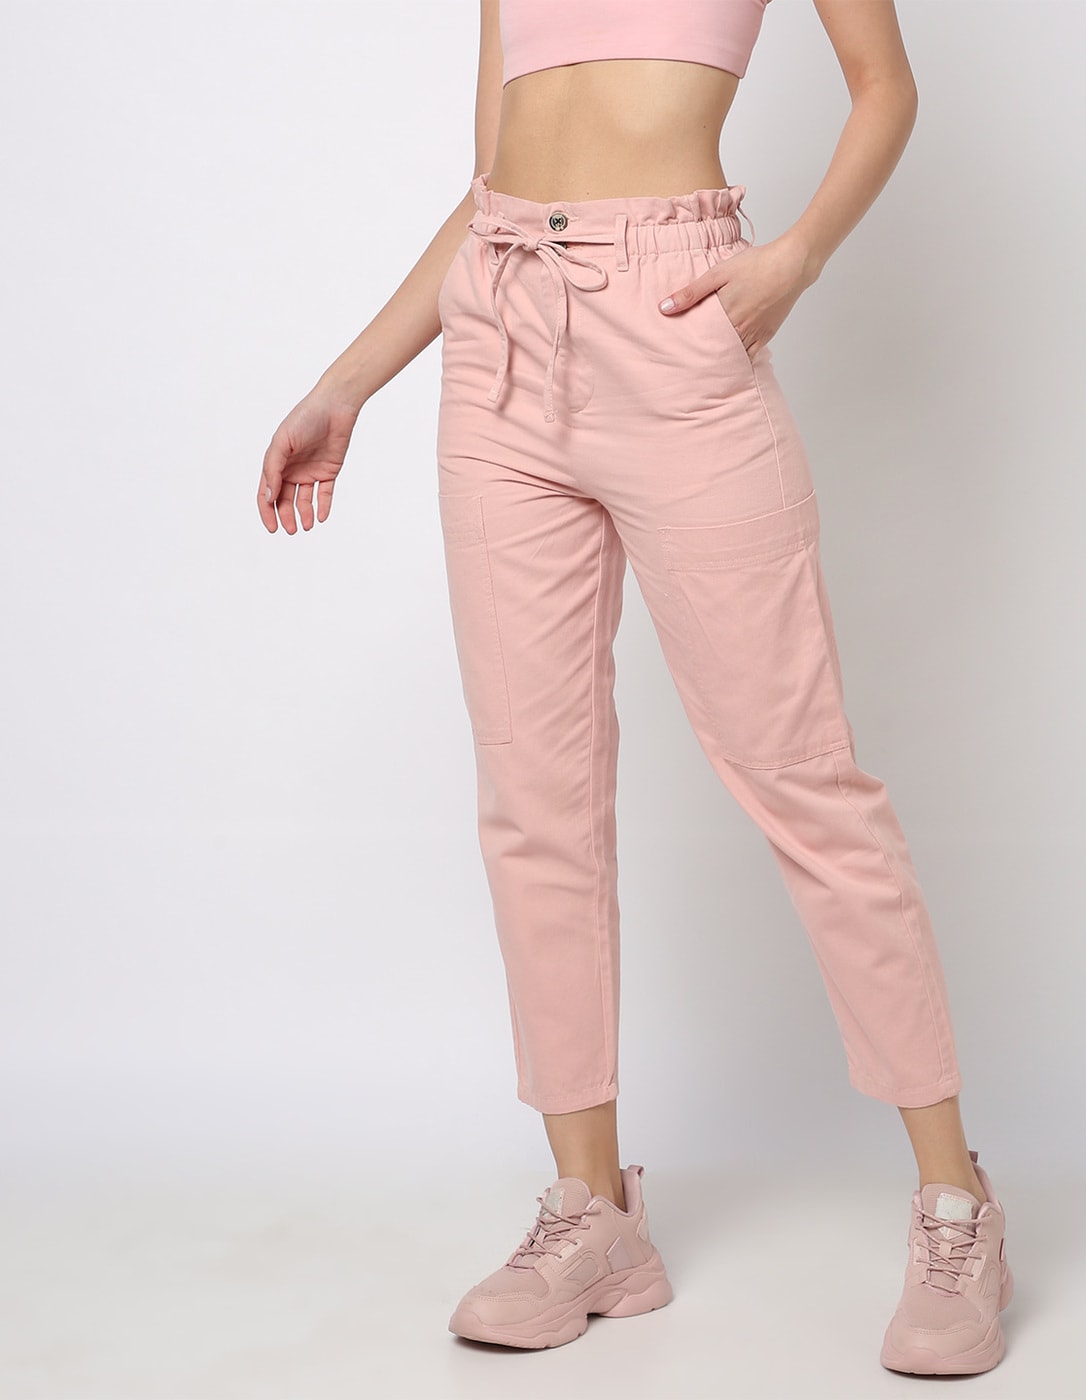 Buy Pink Trousers  Pants for Women by Outryt Online  Ajiocom